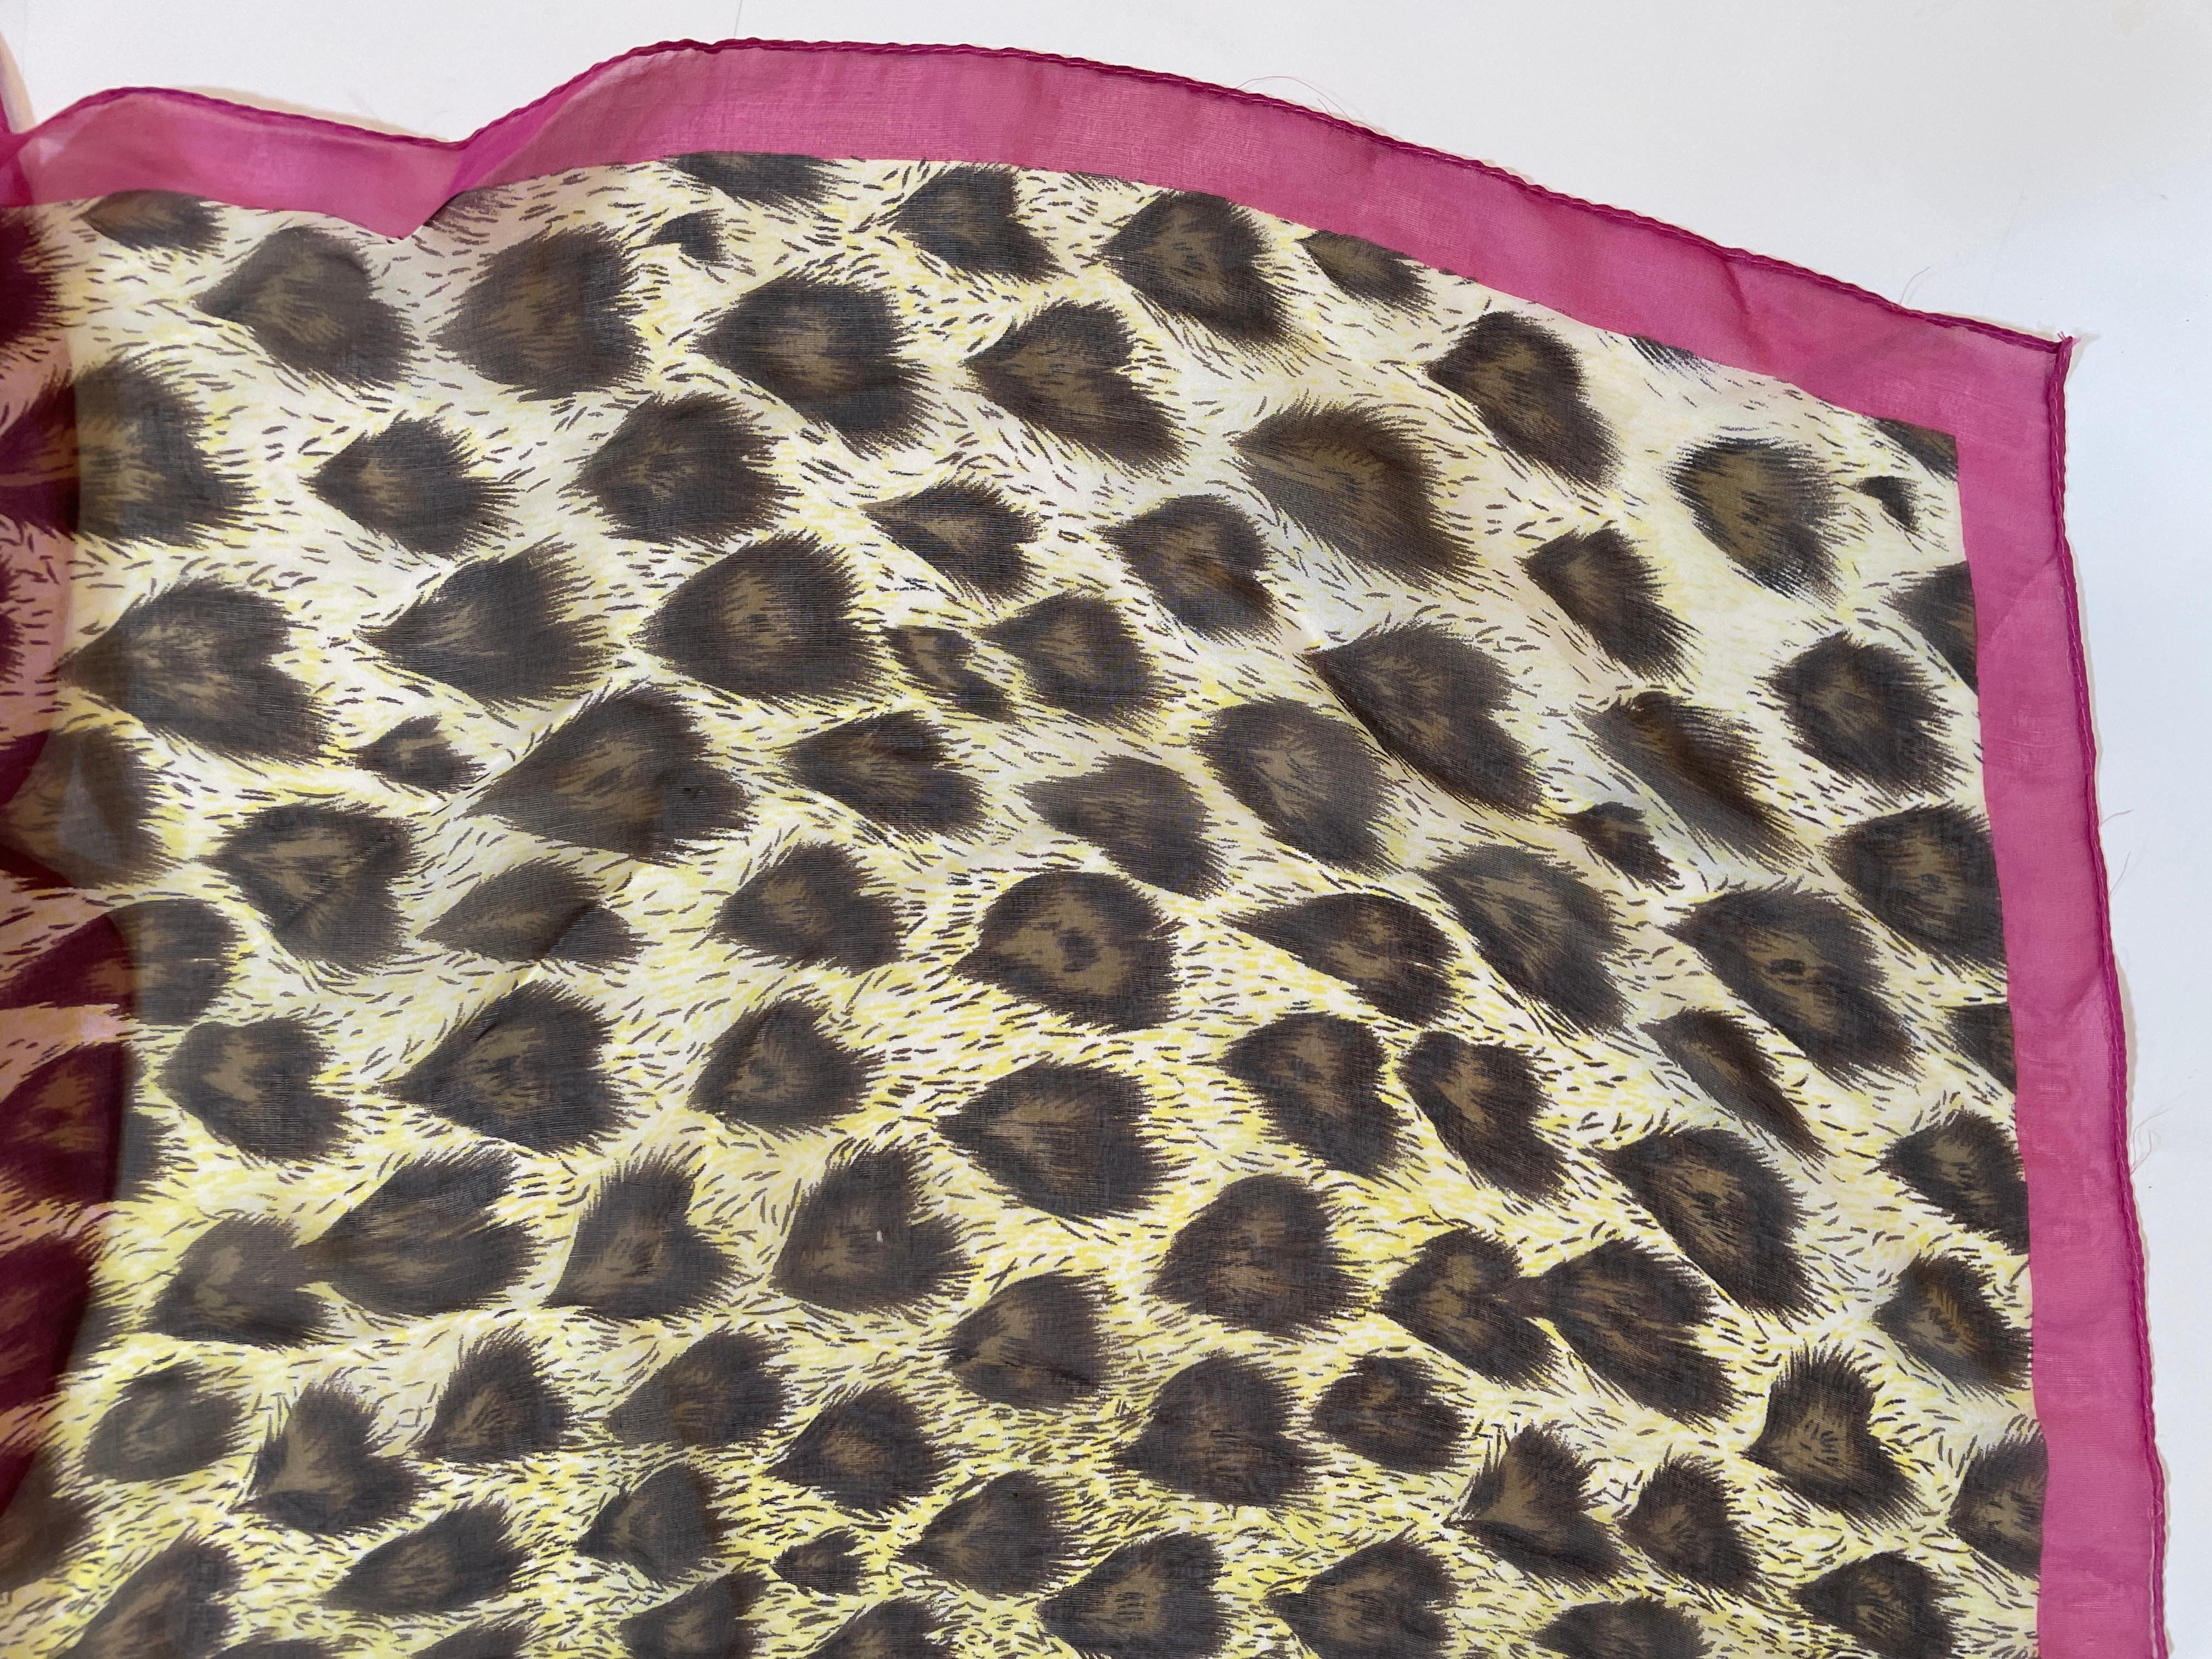 Moschino Animal Print Silk Scarf Made In Italy Pink And Brown 1990s Head Wrap For Sale 7